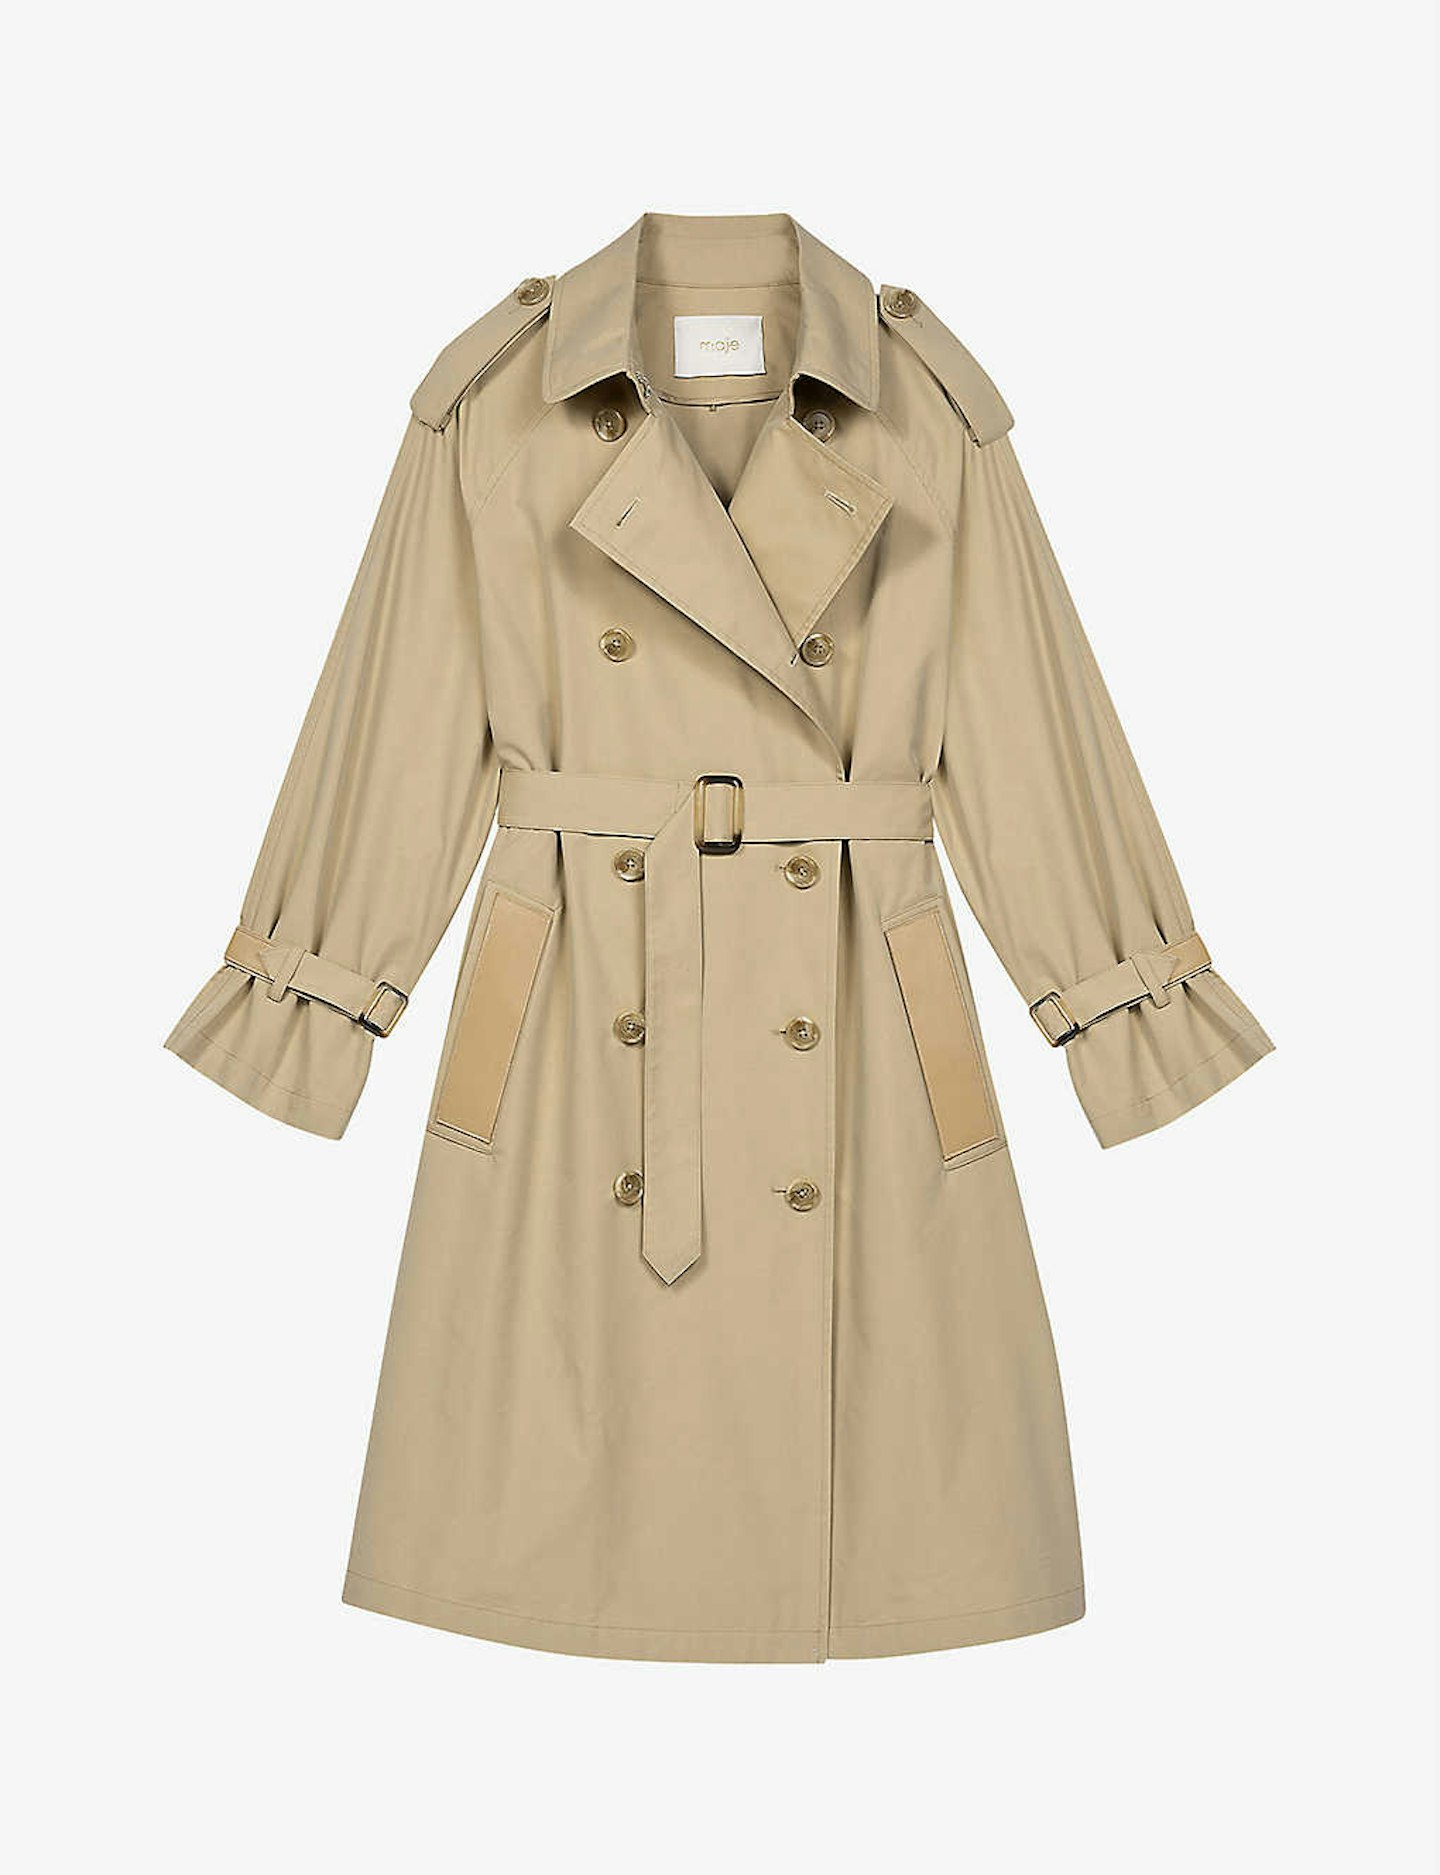 best trench coats for women MAJE, Belted Cotton Blend Trench Coat, £399